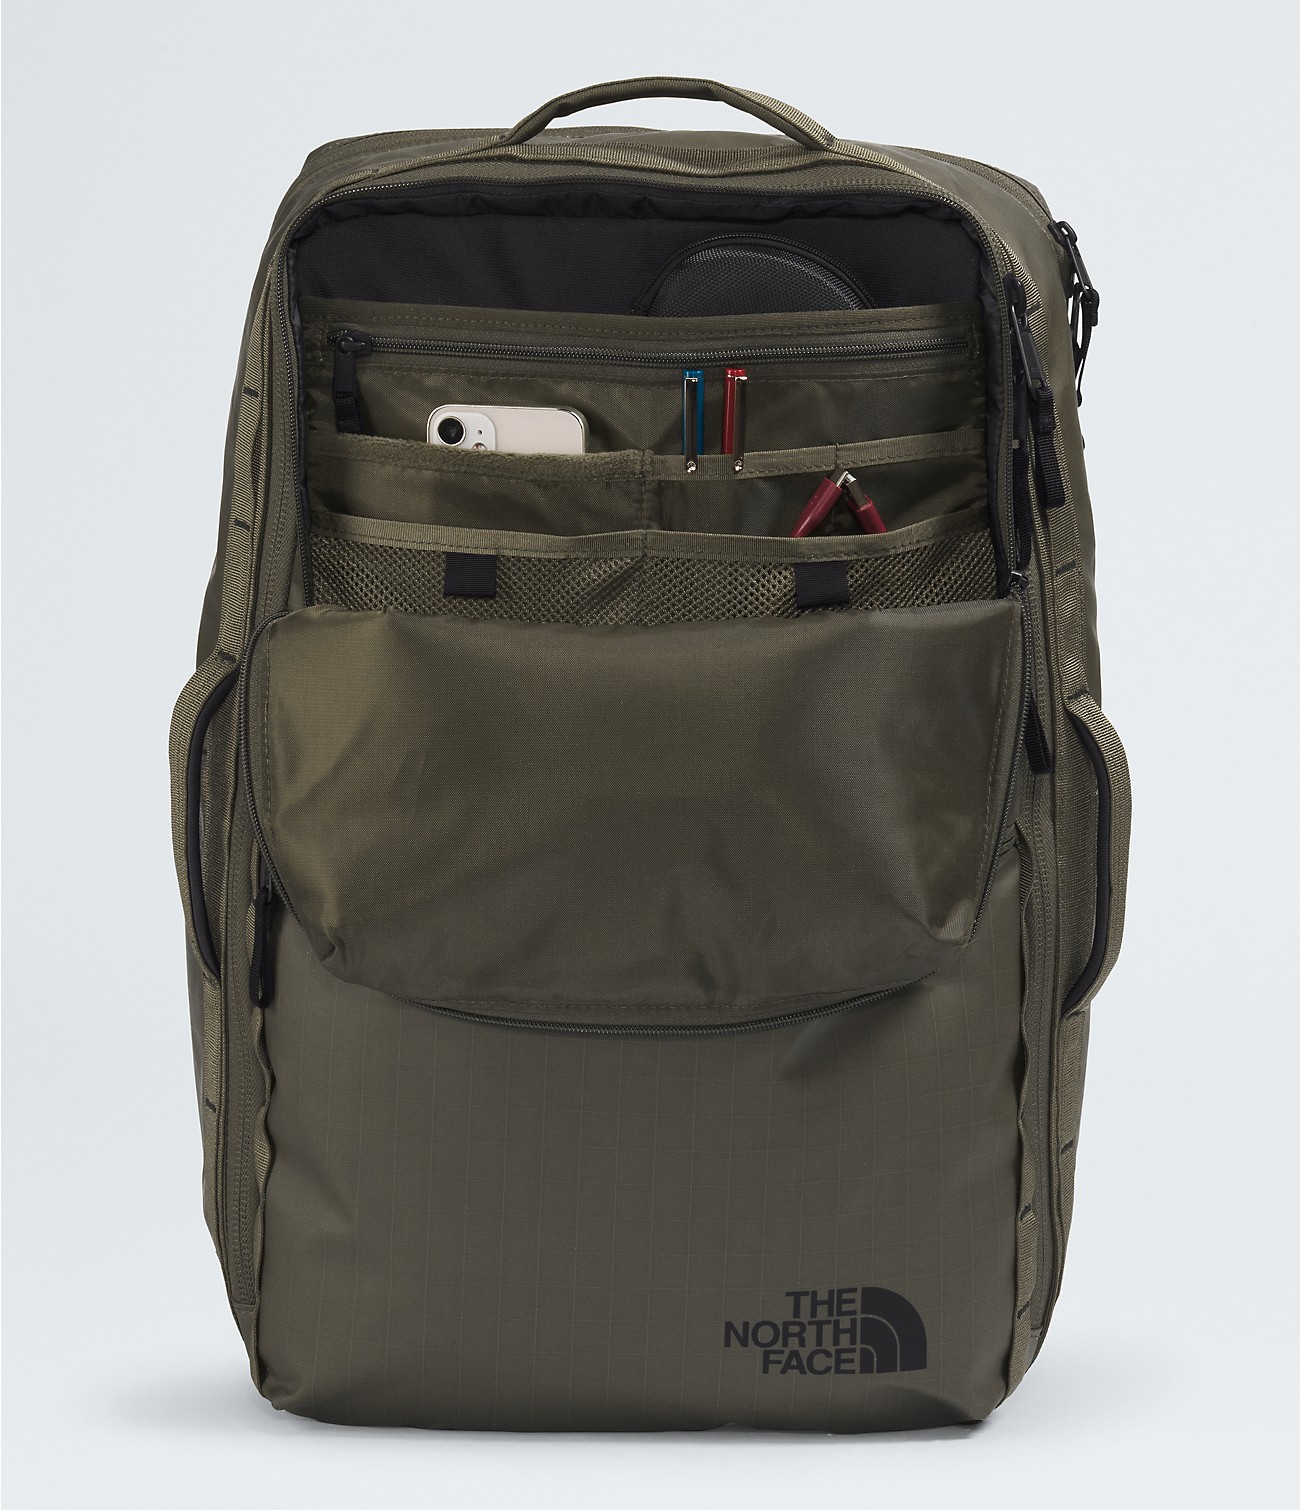 Base Camp Voyager Travel Pack | The North Face